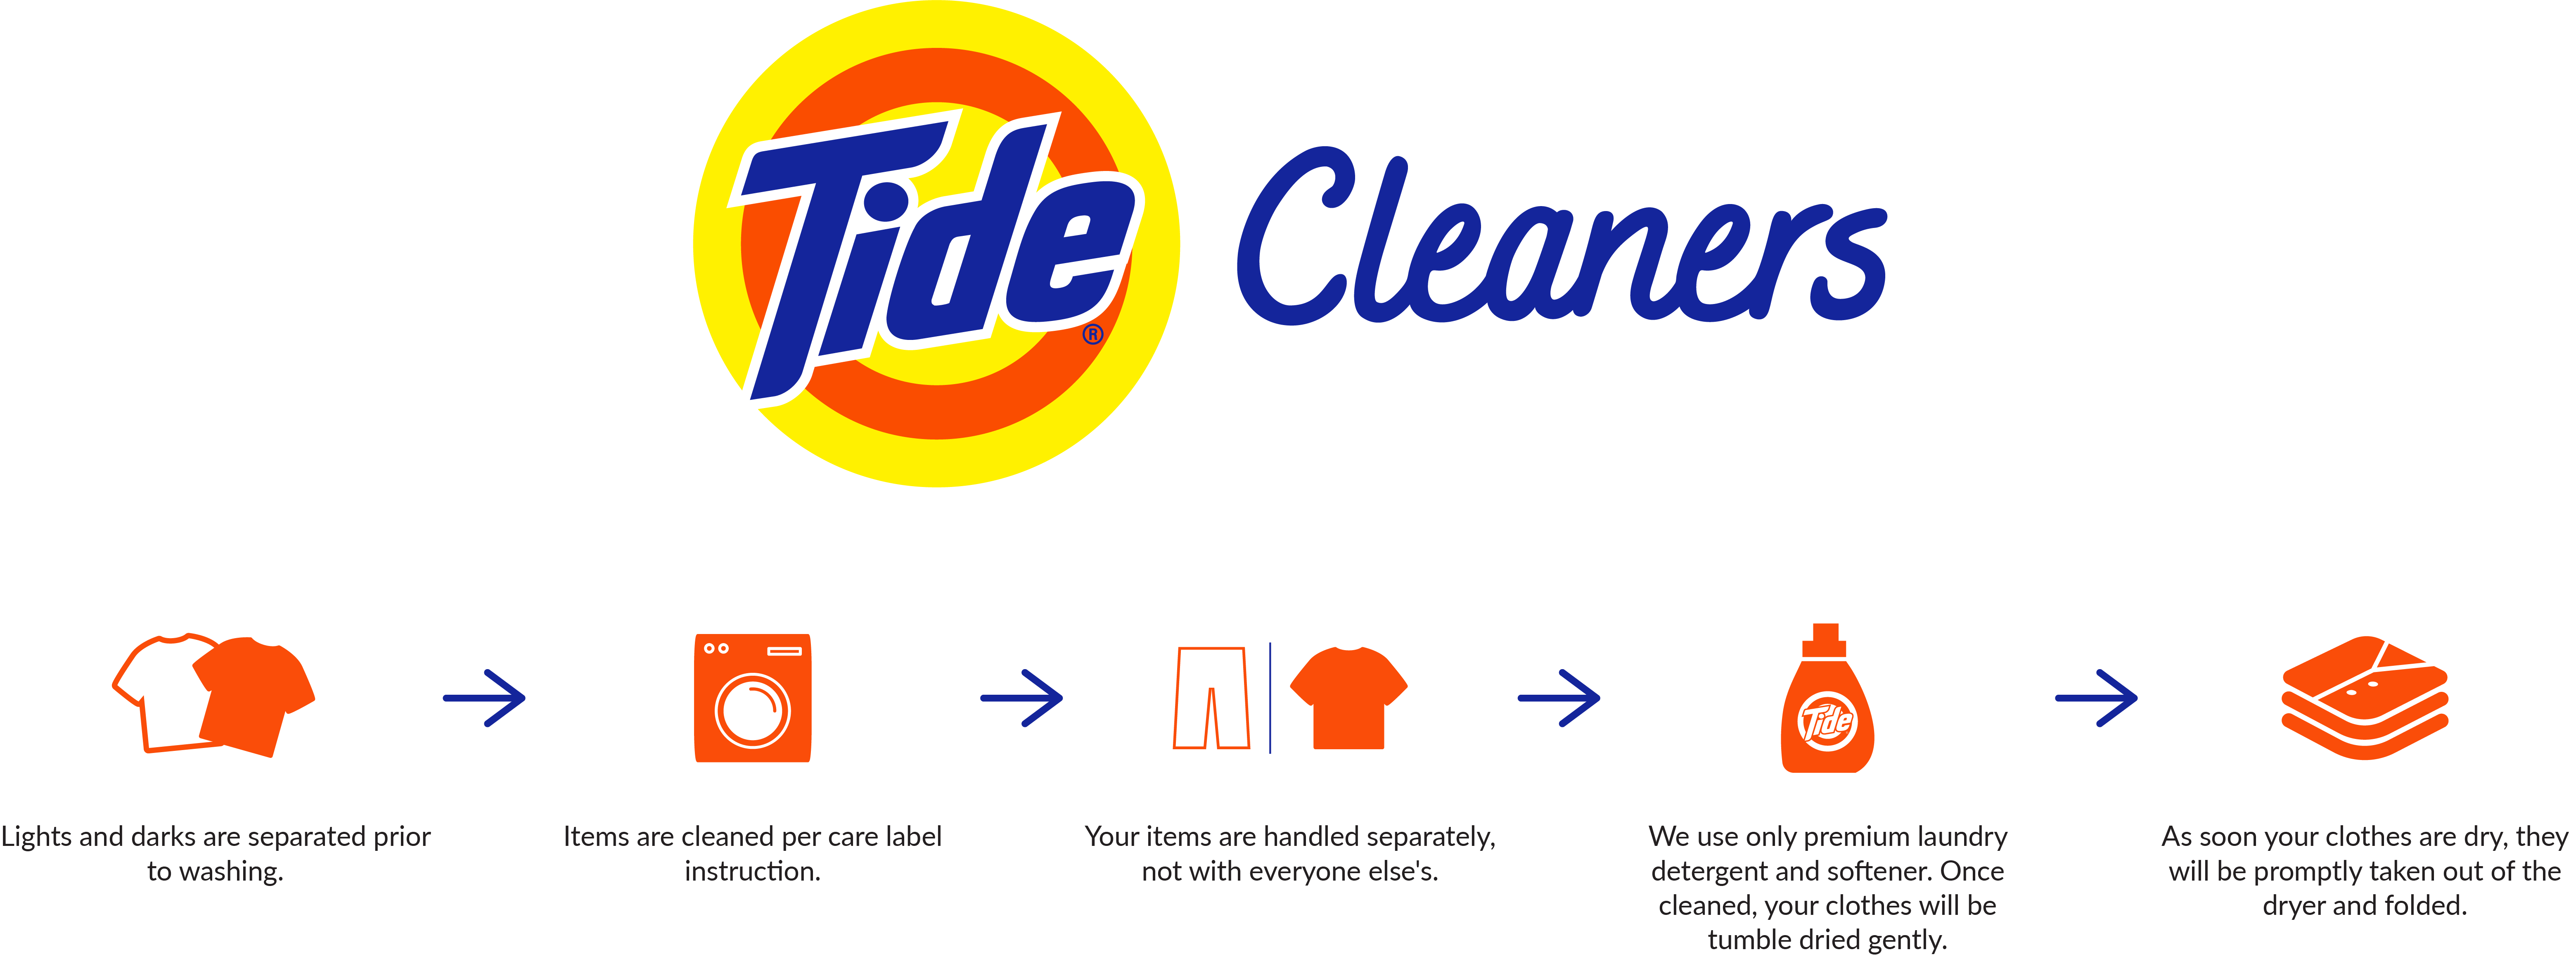 Tide Cleaners Wash and Fold Laundry Service Process